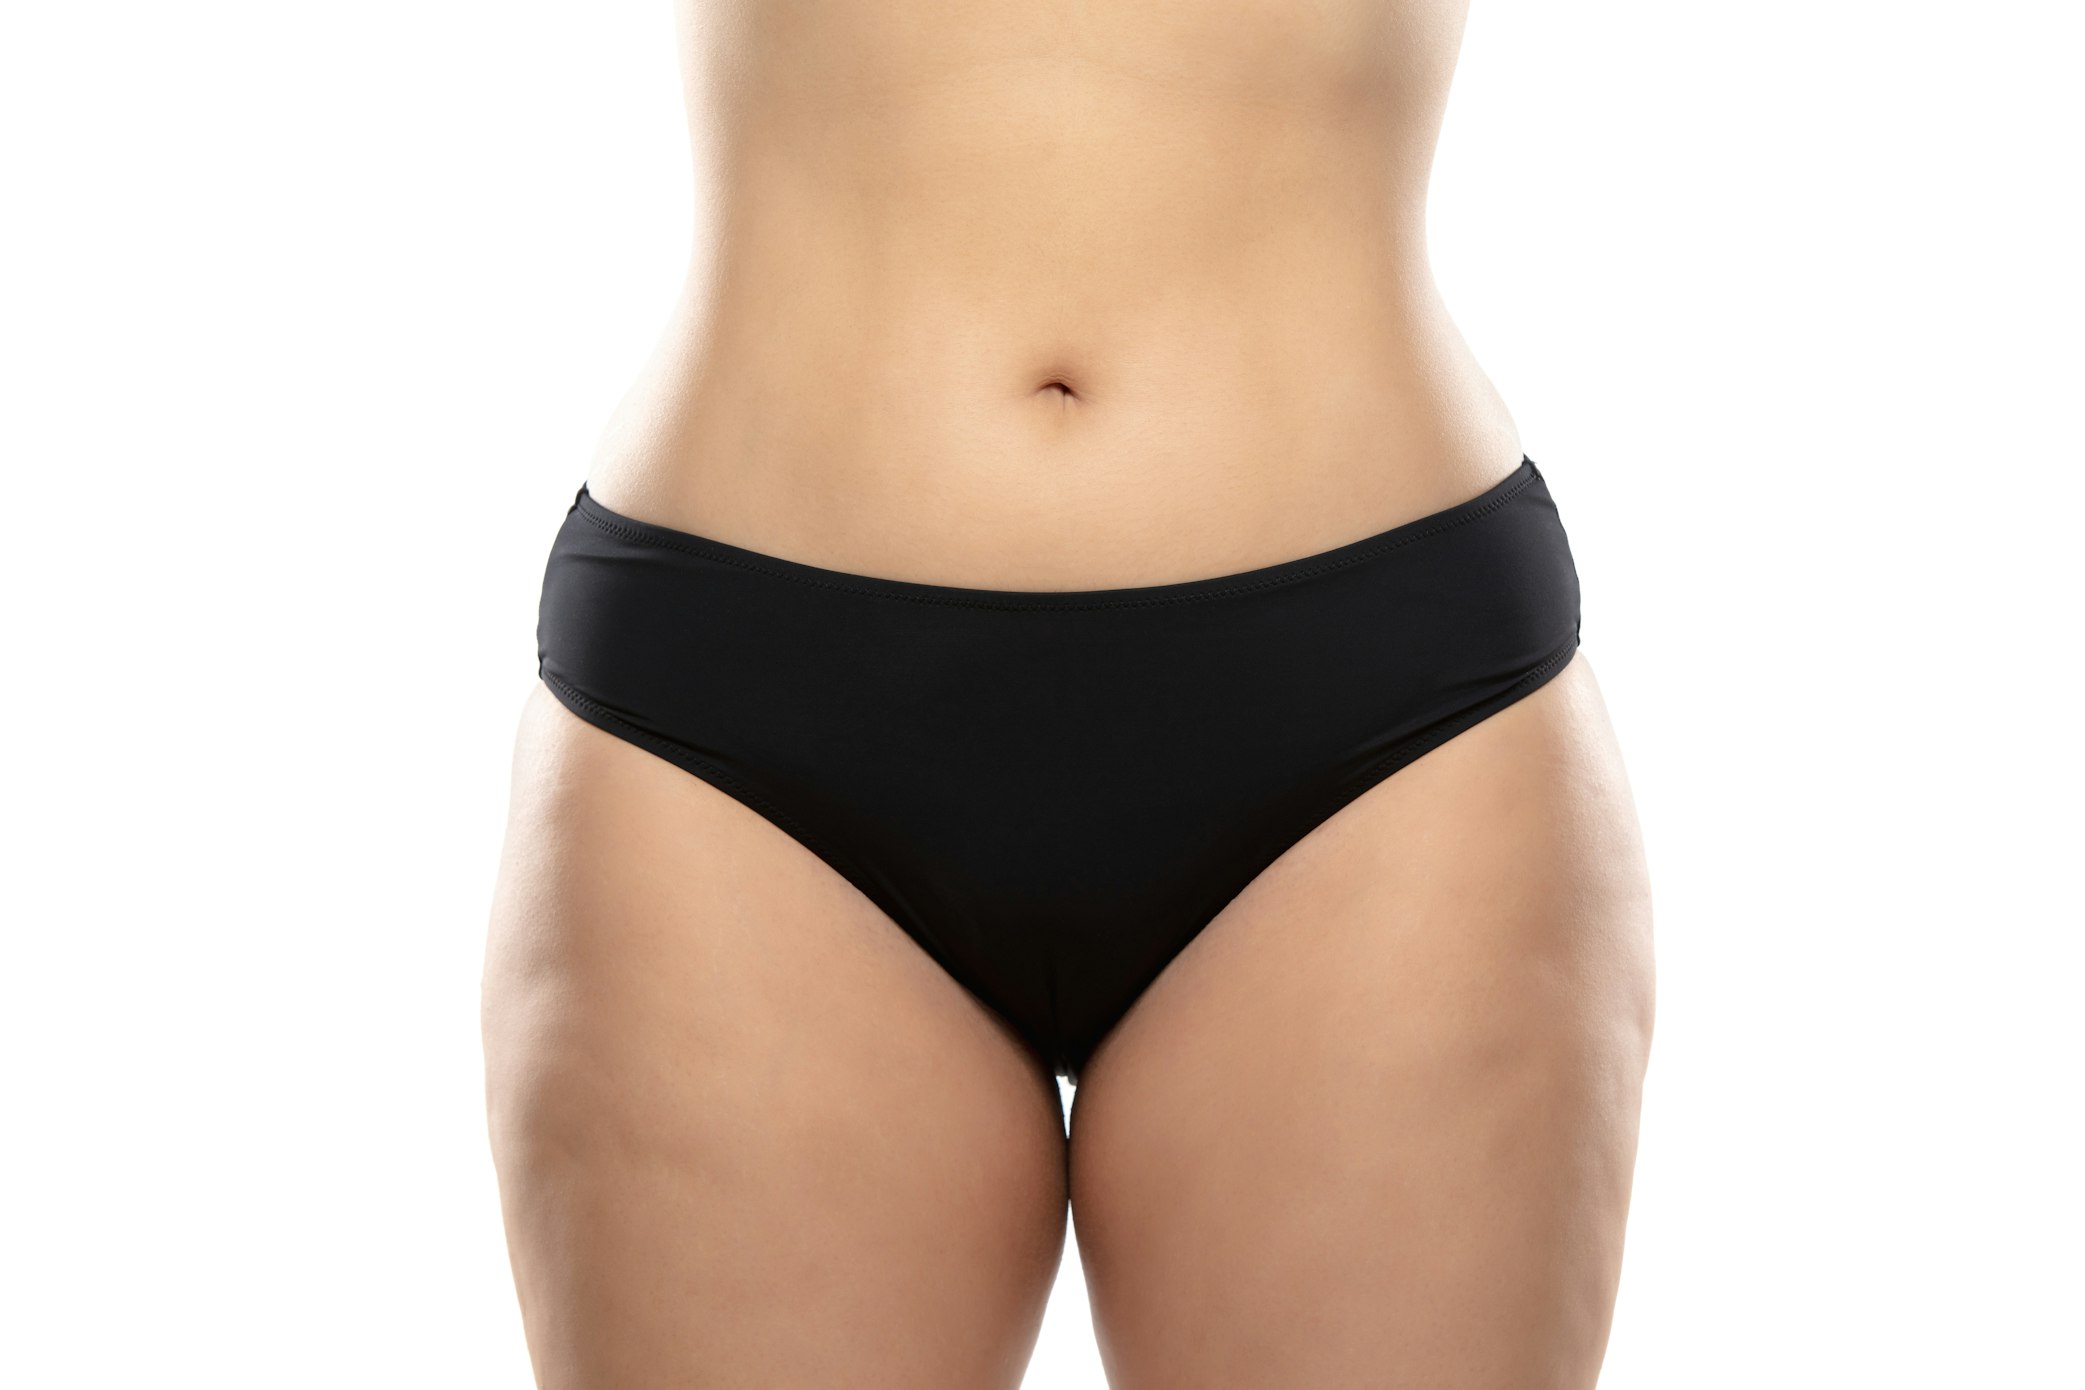 How Can I Lose Fat Pockets on the Inner Thigh Region?